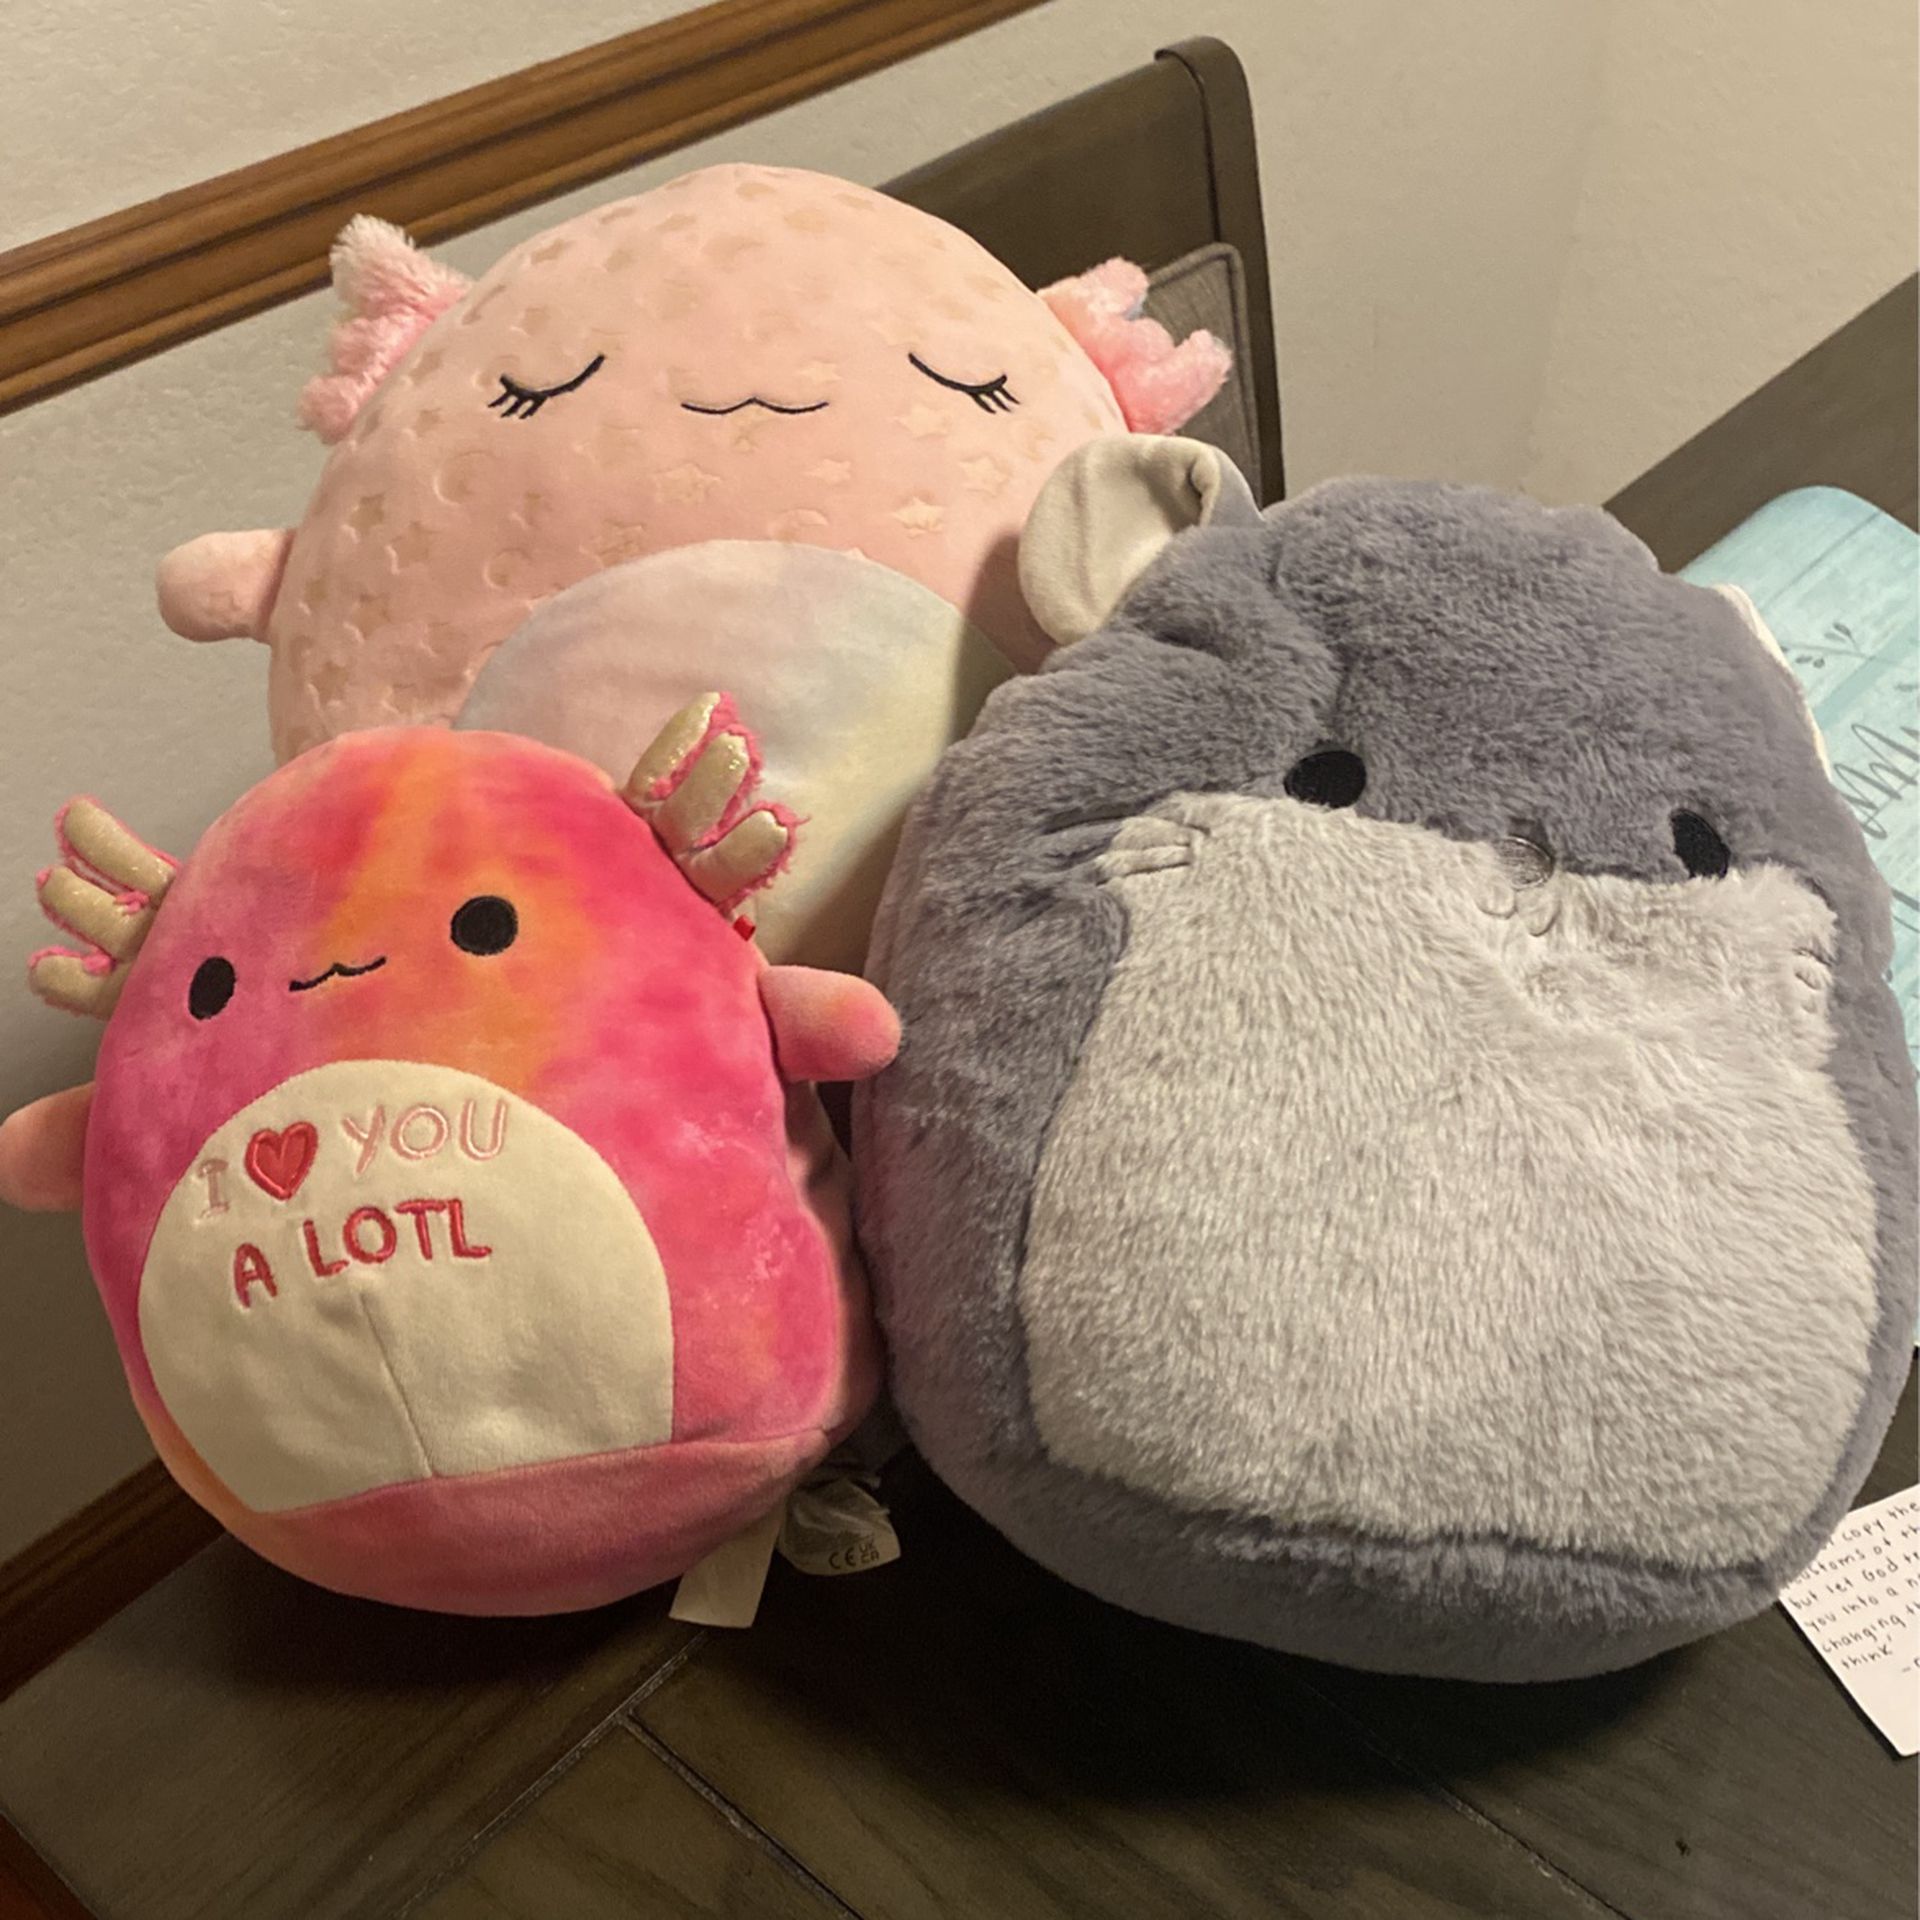 Squishmalows For Sale